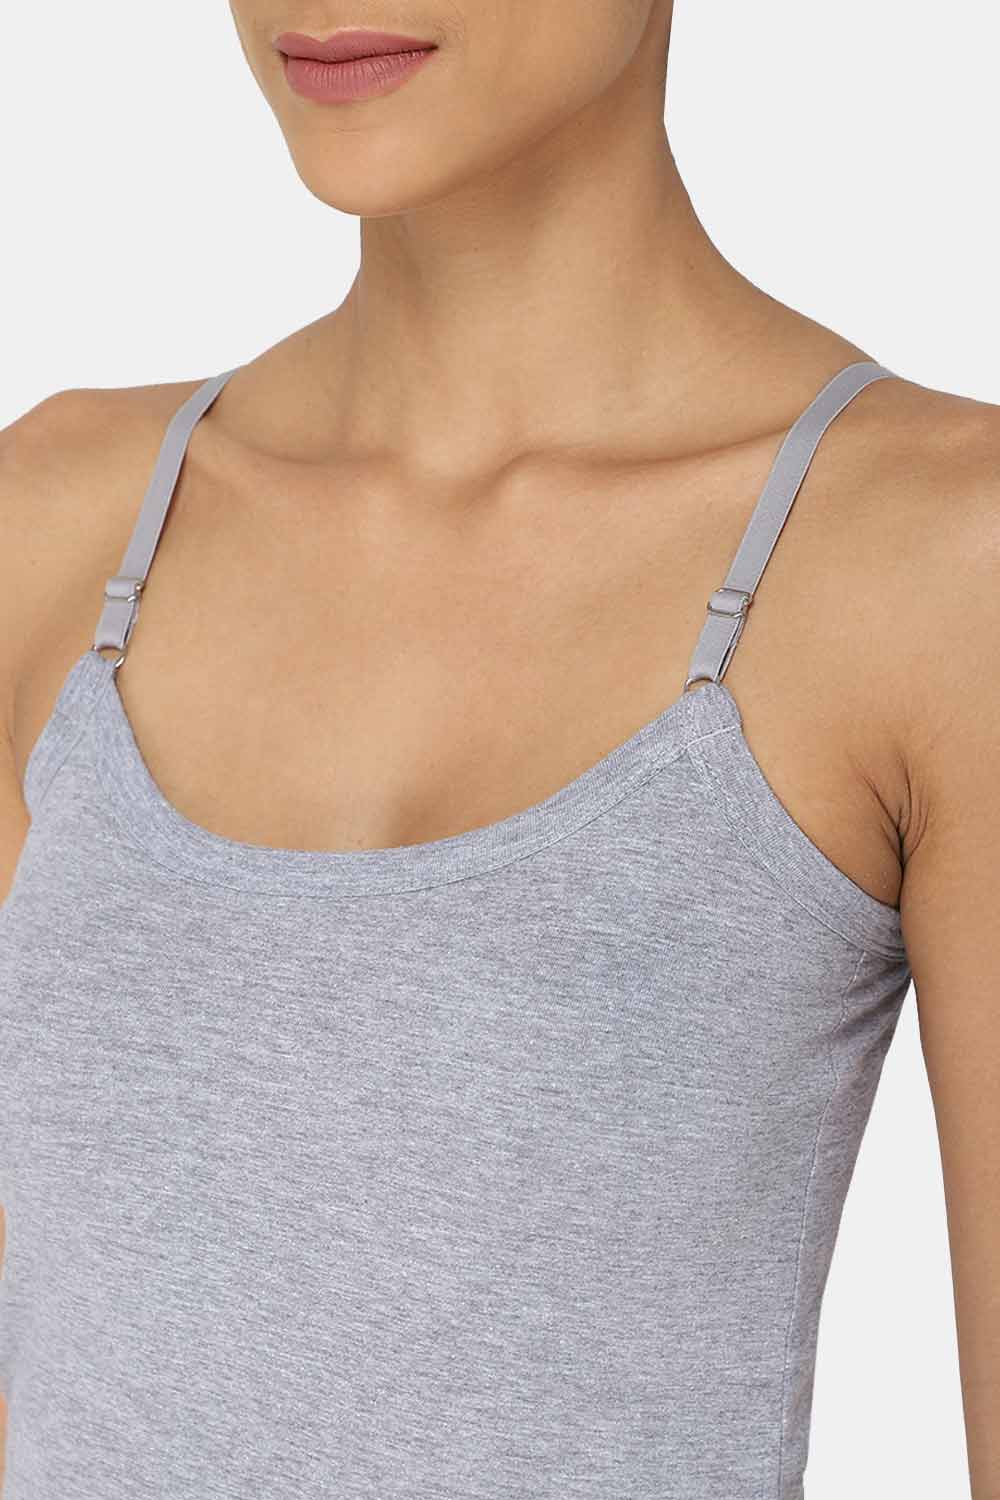 Intimacy Camisole-Slip Special Combo Pack - In05 - Pack of 3 - C56